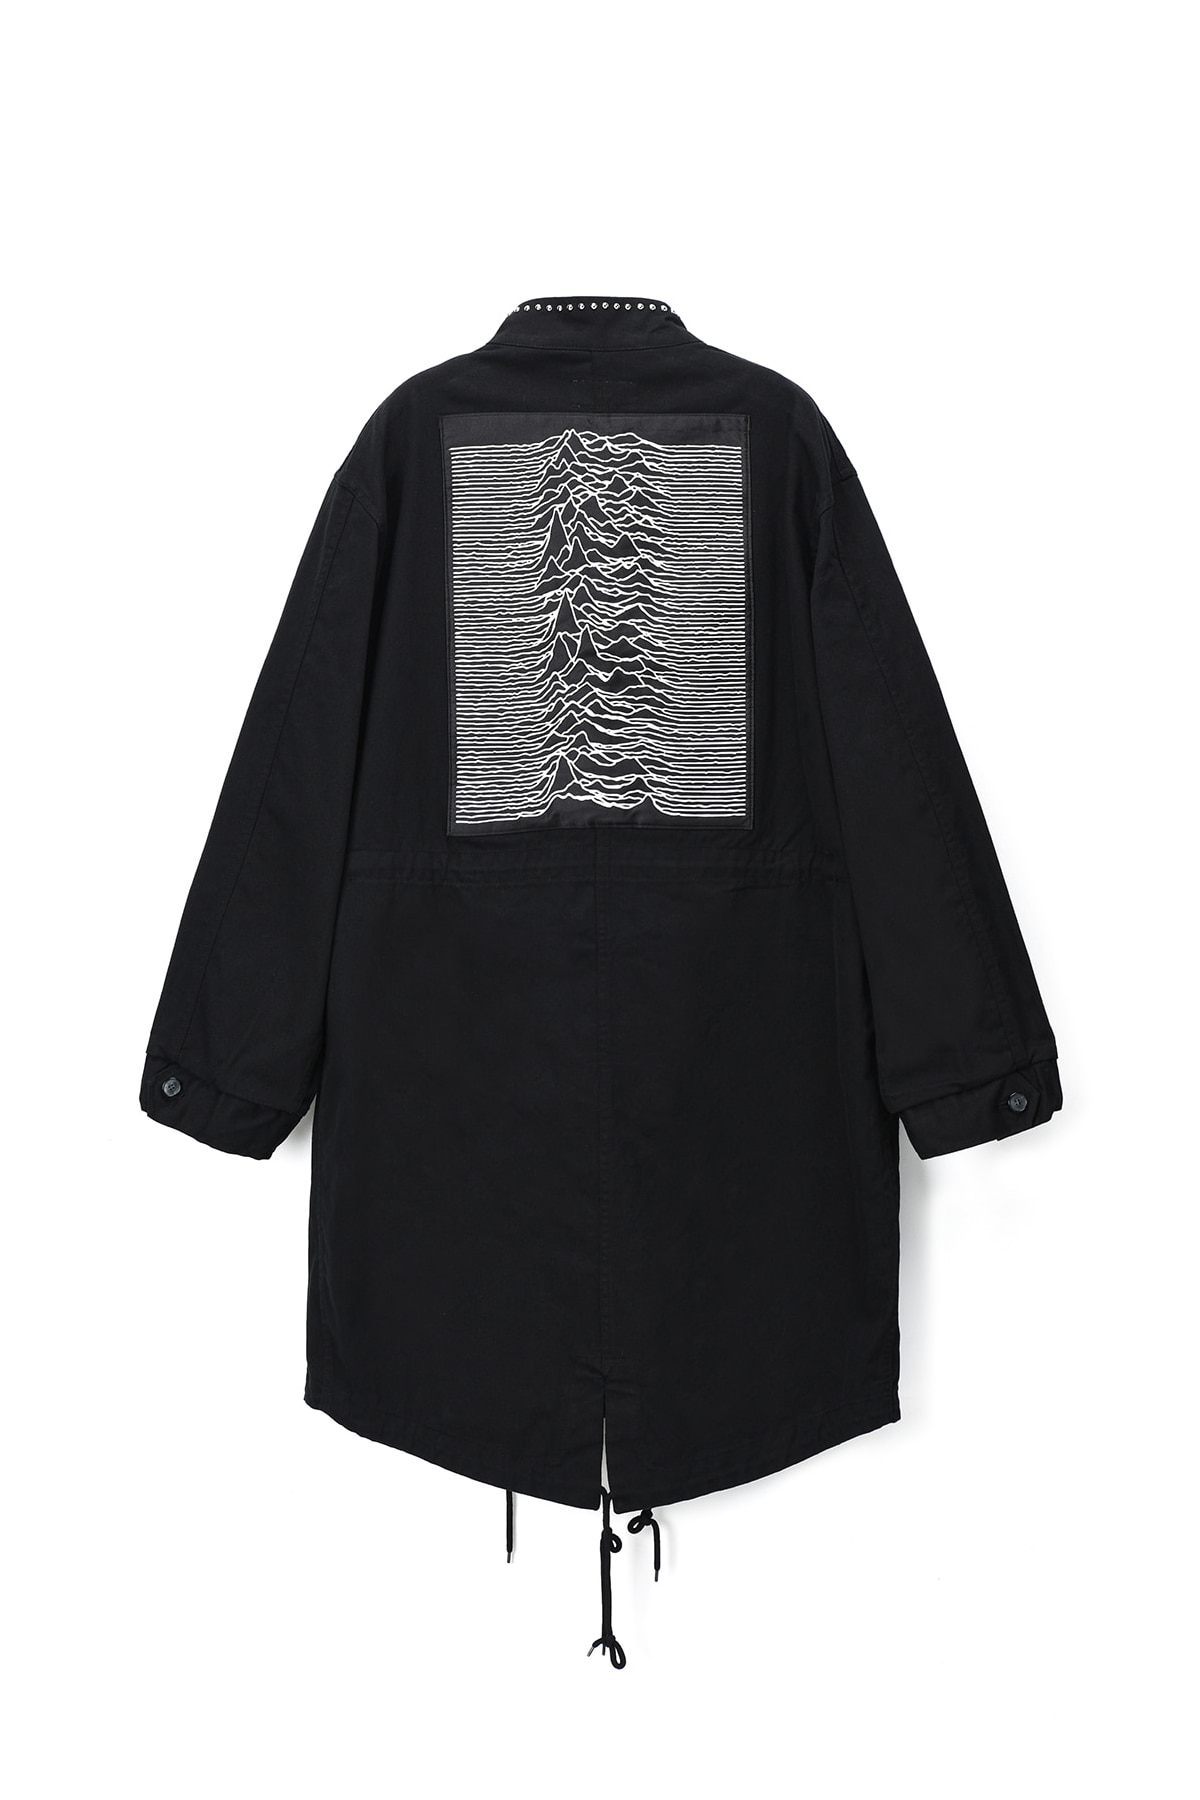 UNKNOWN PLEASURES EMBROIDERED STUDS MODS PARKA IN COTTON TWILL BLACK